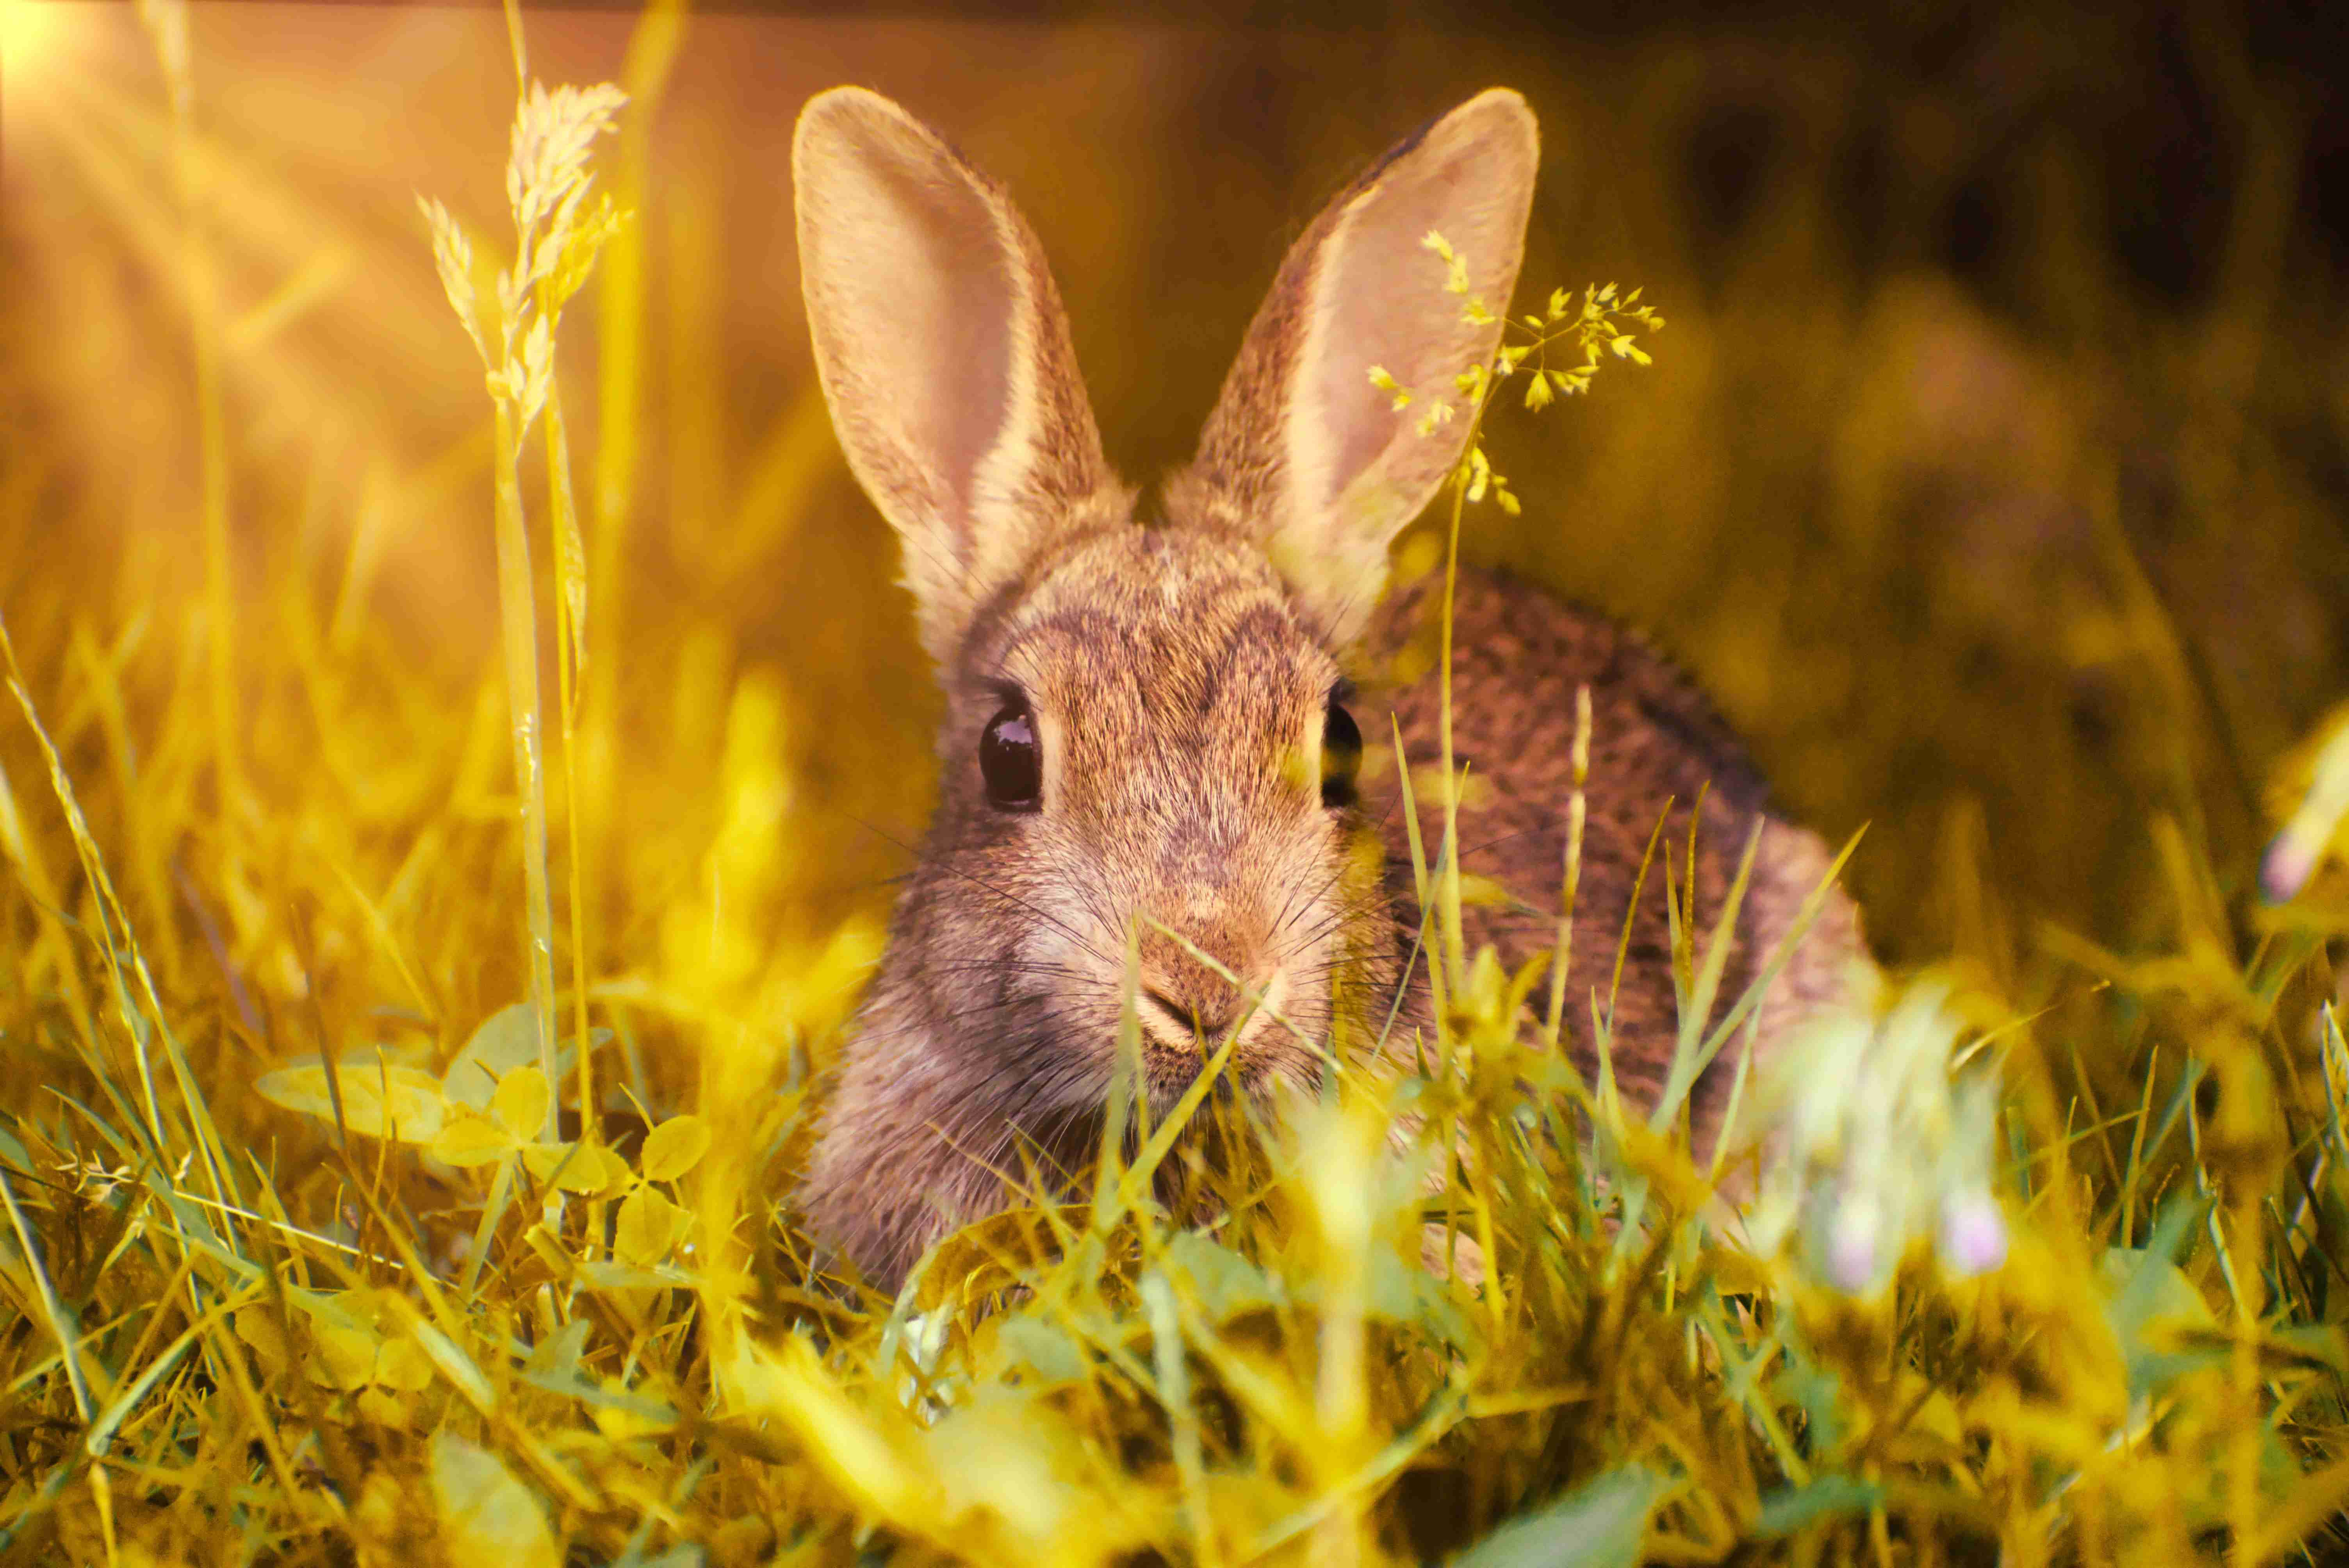 5 Effective Ways to Prevent Reproductive Issues in Your Rabbit